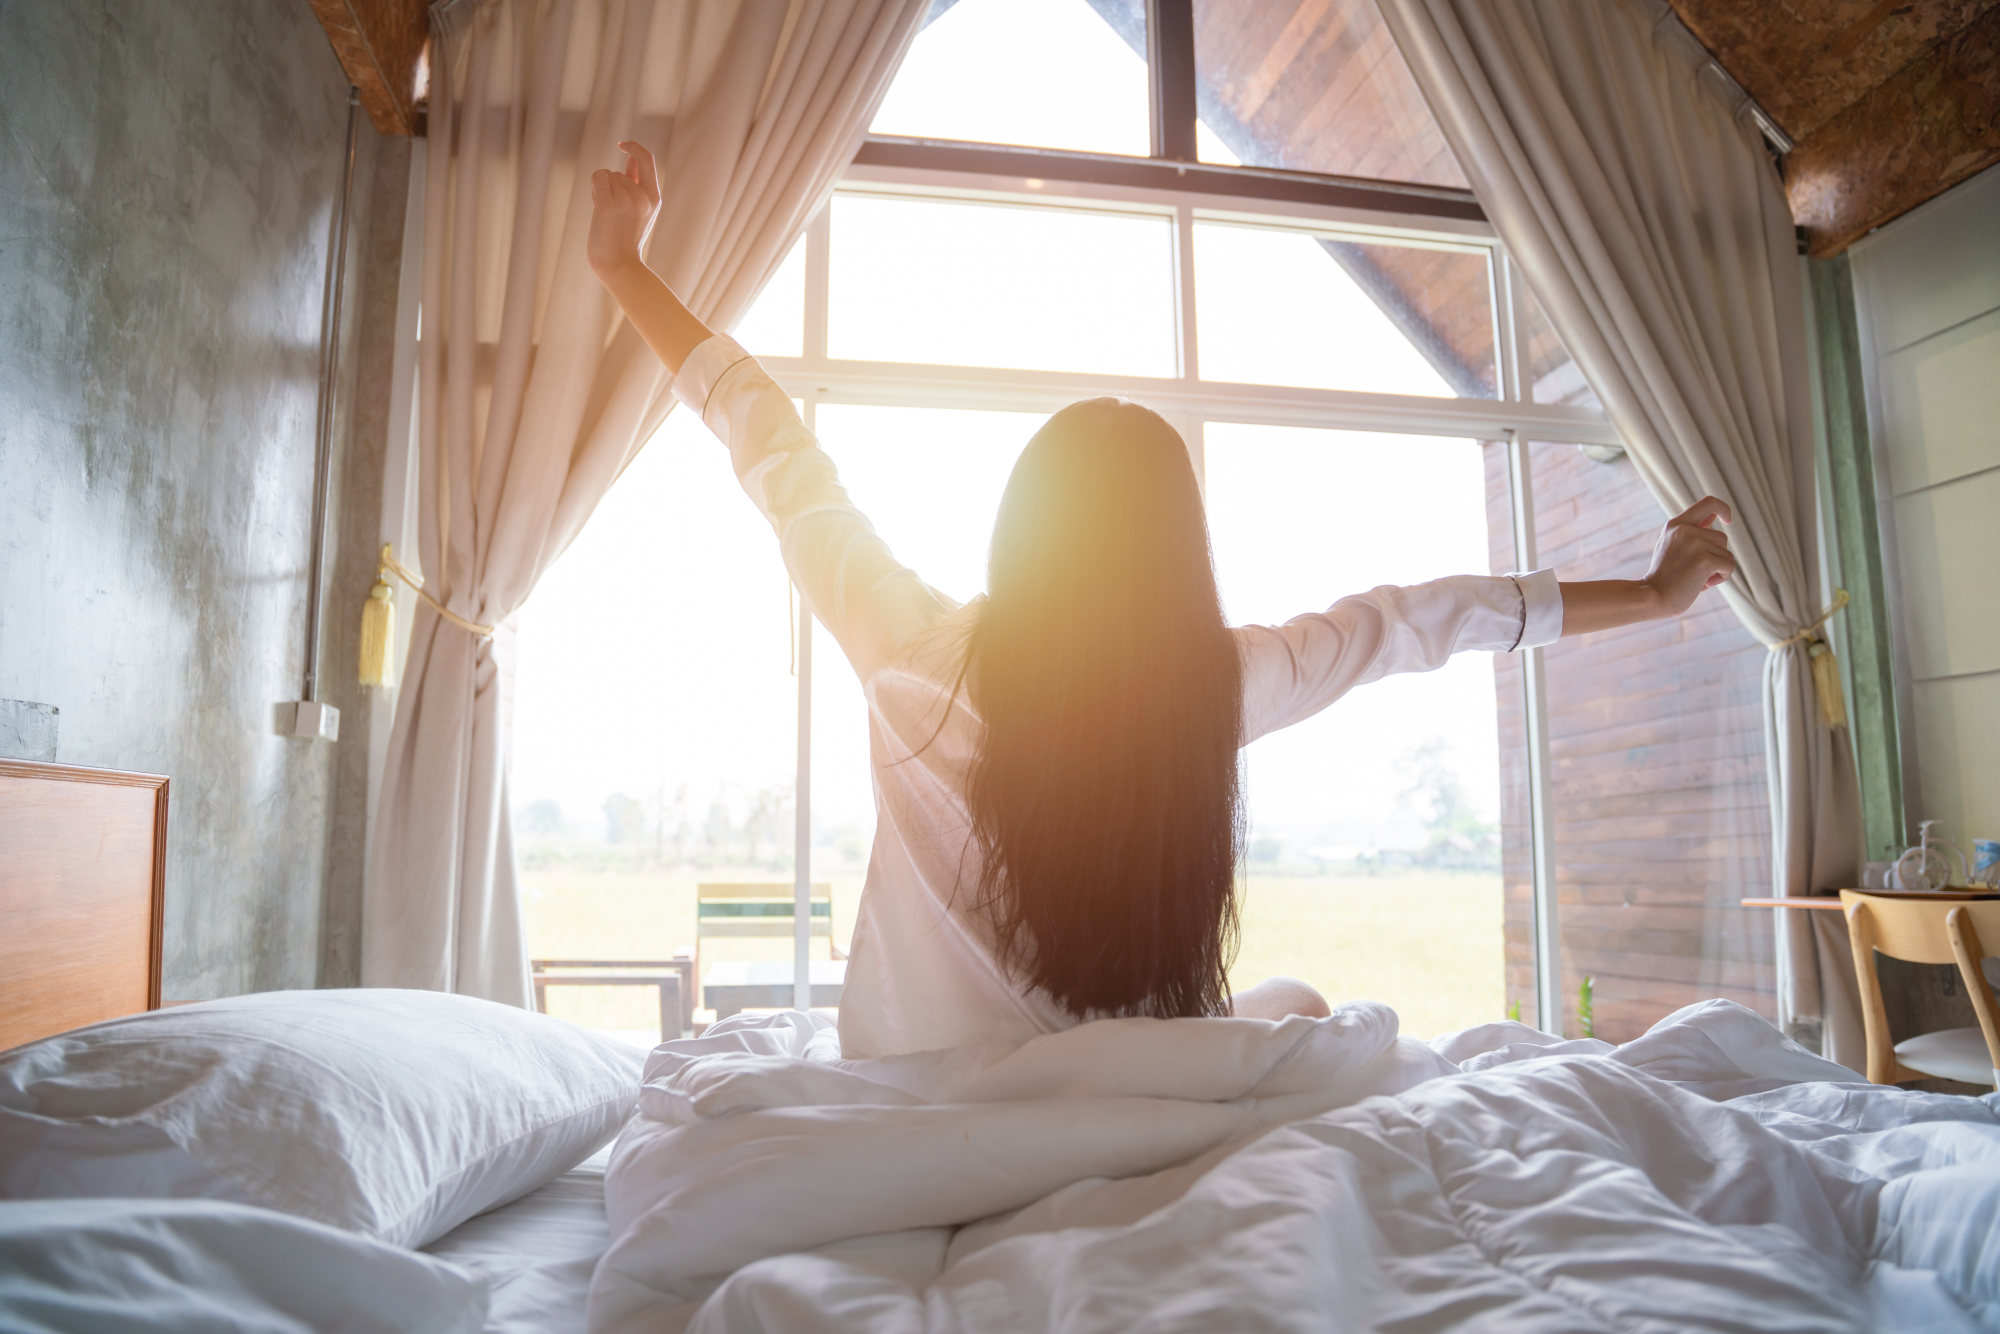 A woman waking up in the morning, stretching in the bed with the sun shining on her from a window